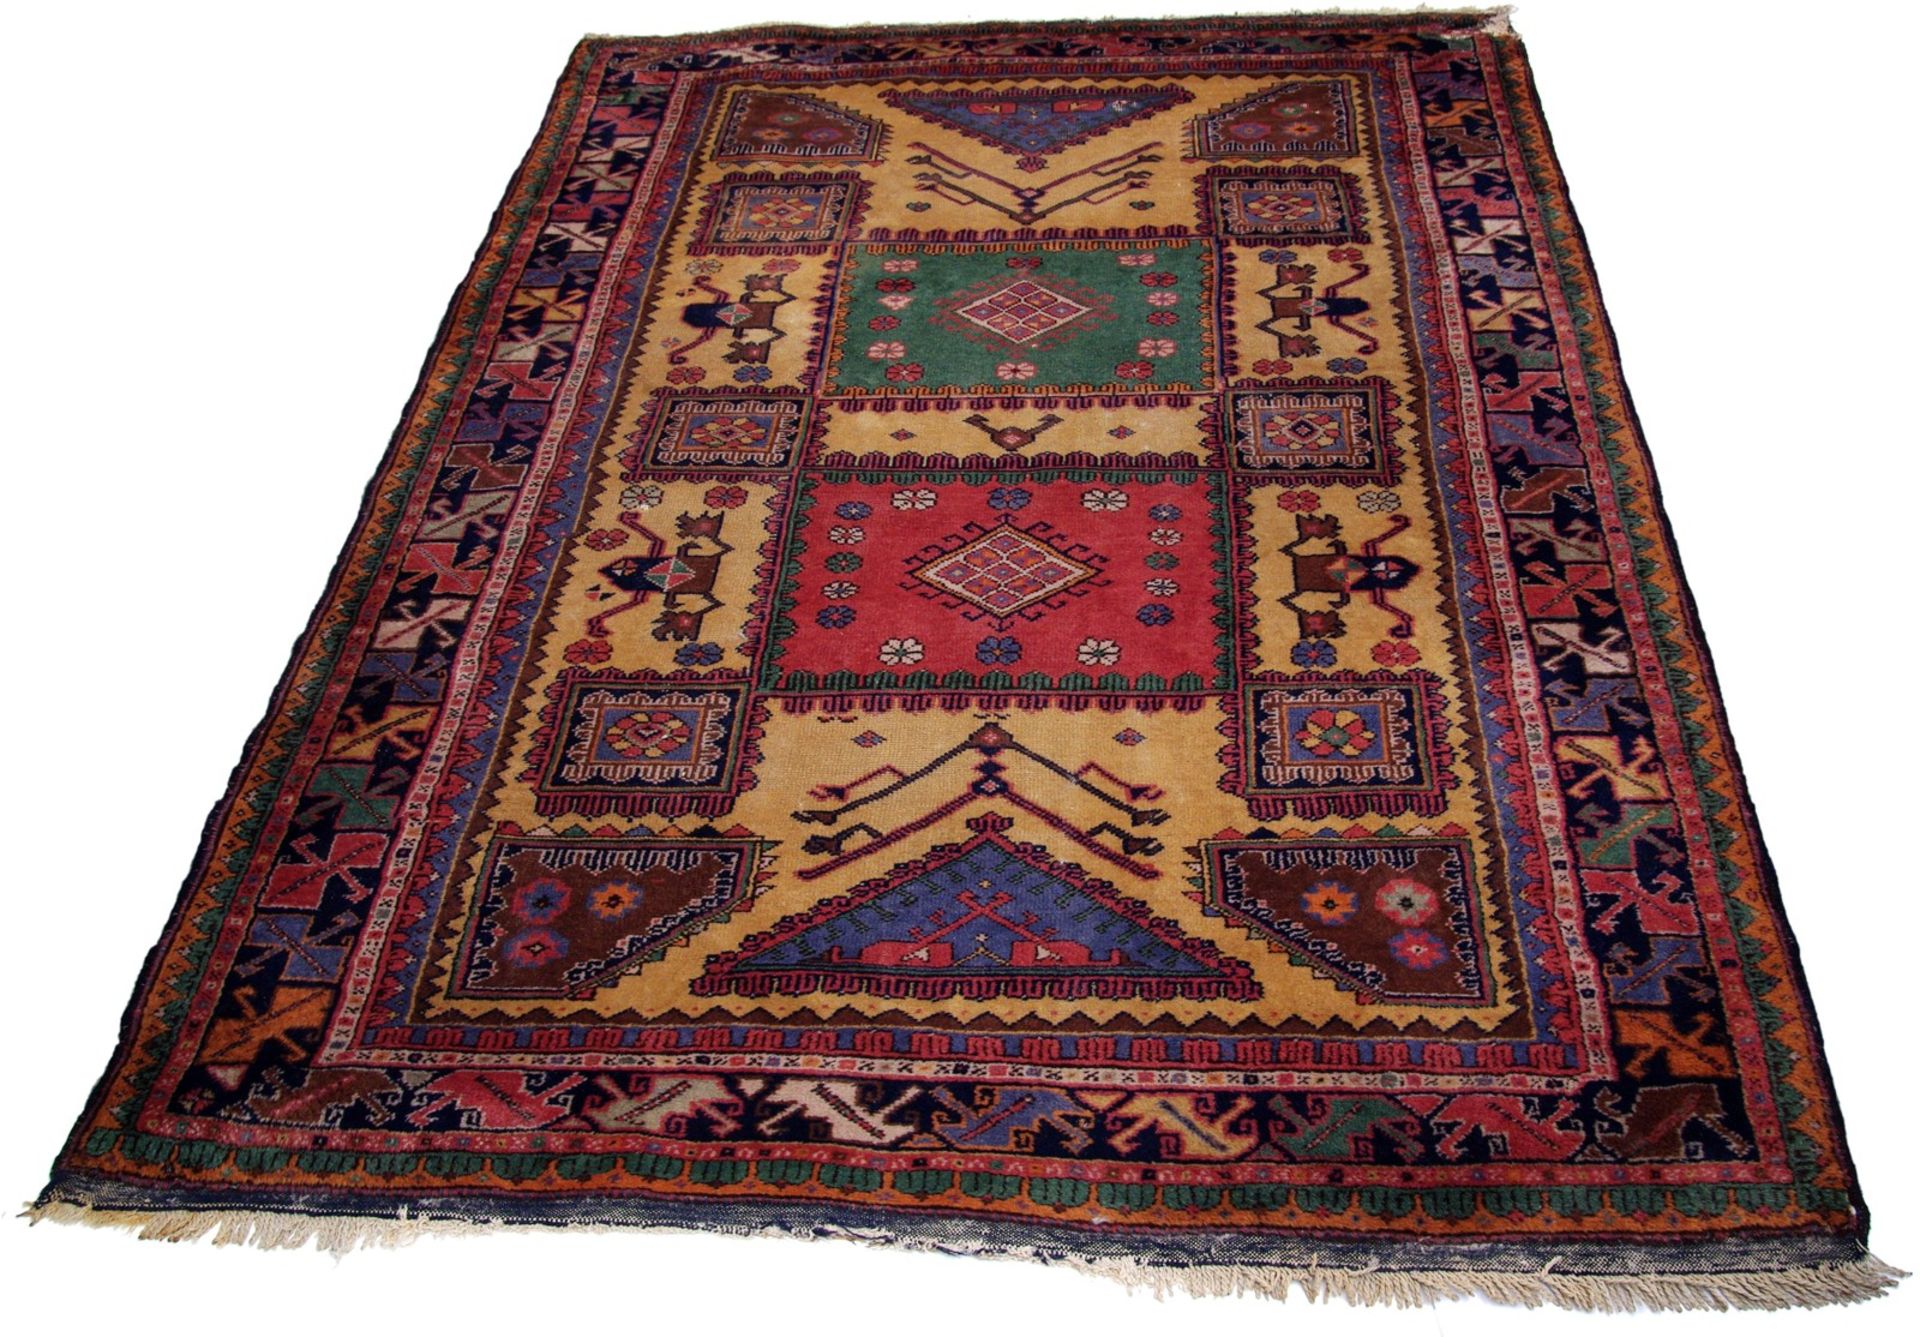 A Bergama Rug of the Holbein Type